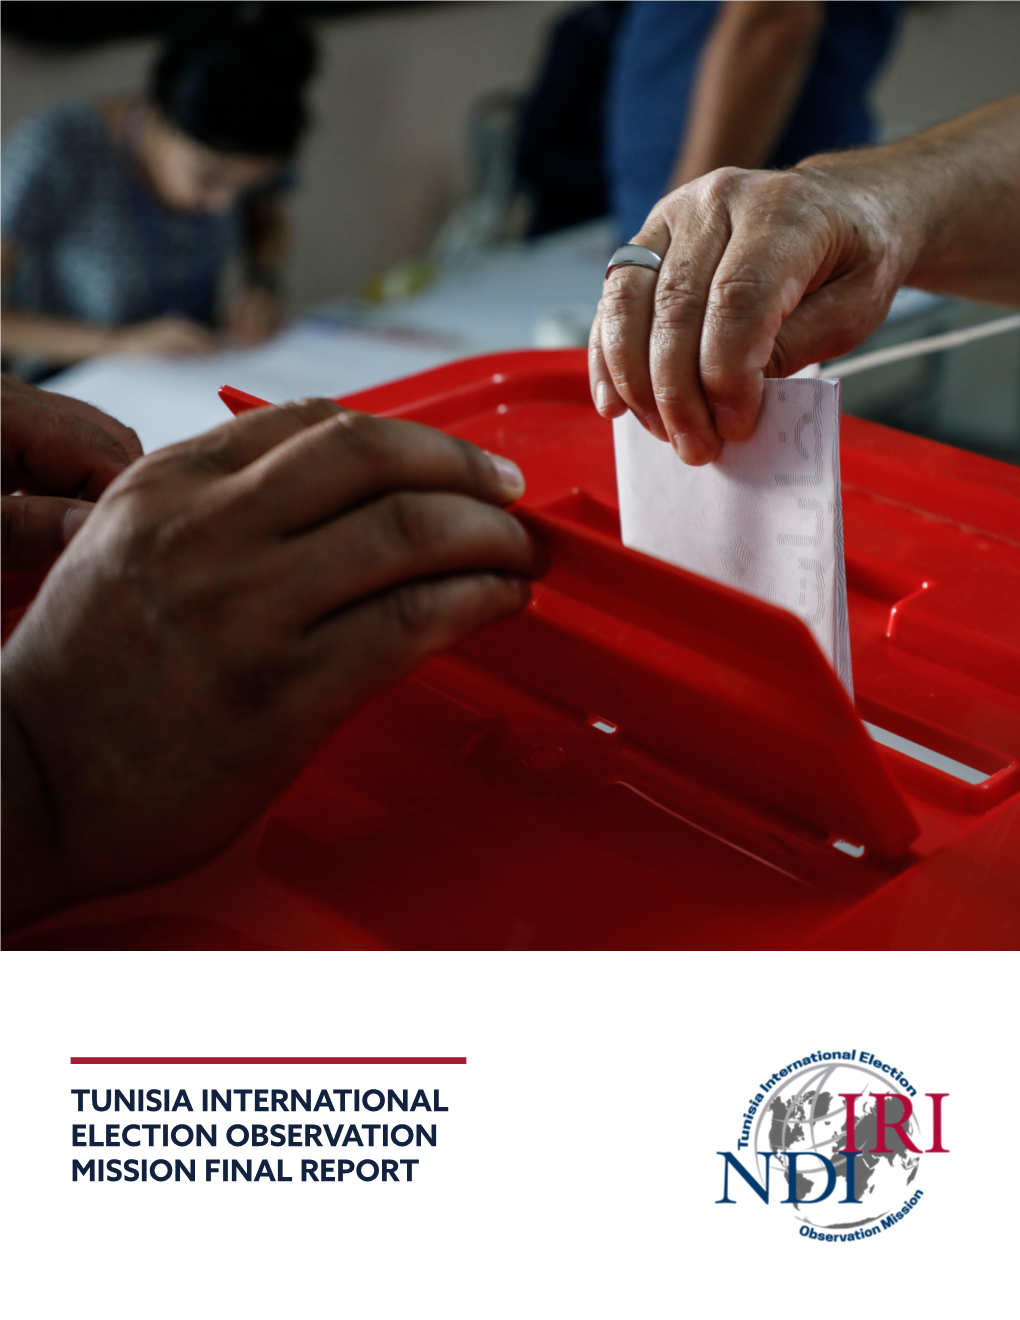 Tunisia International Election Observation Mission Final